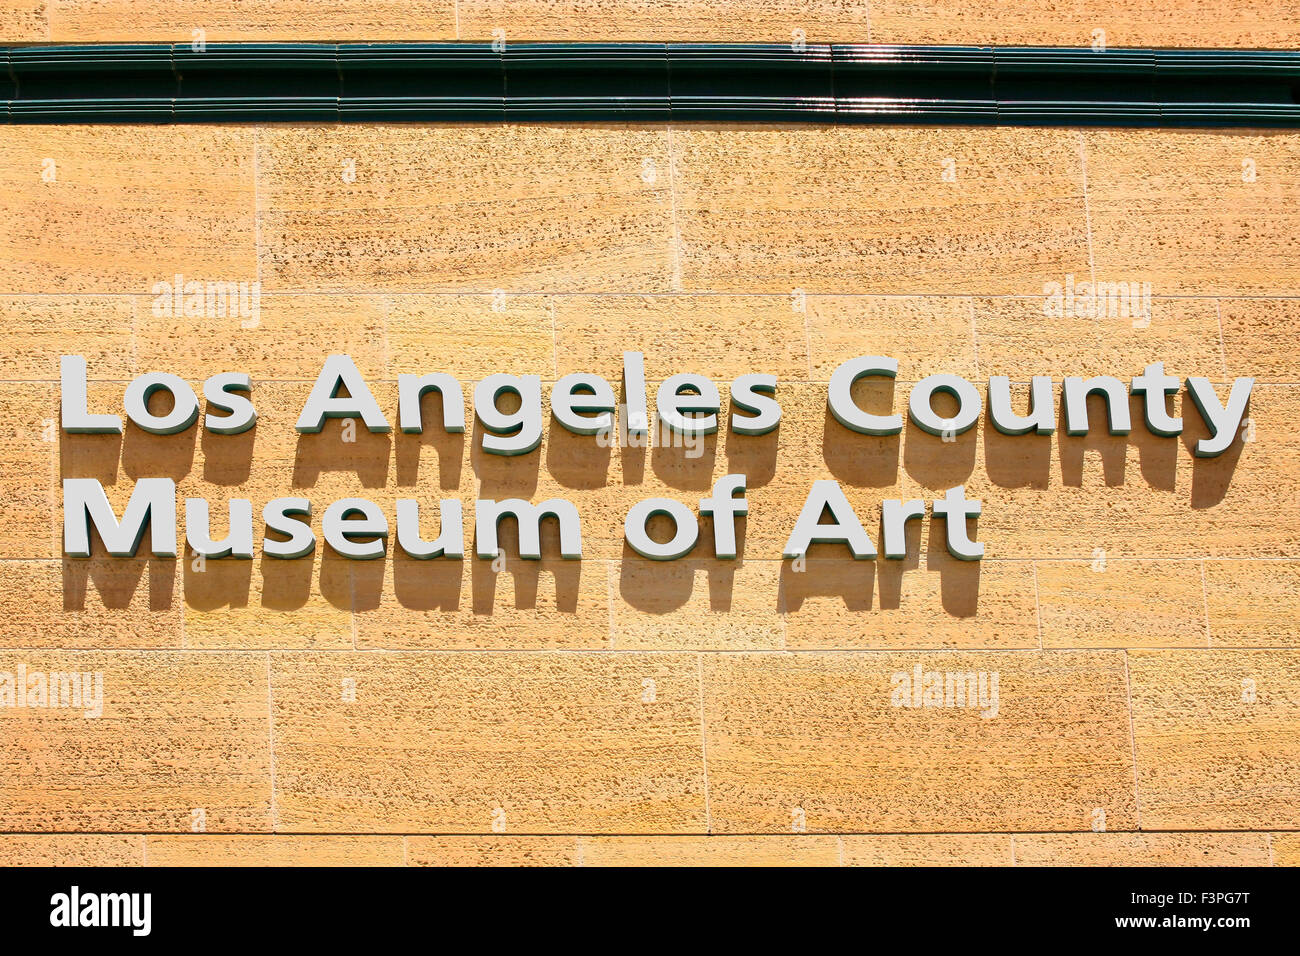 Il Los Angeles County Museum of Art (LACMA) parete sign on Wilshire Boulevard di Miracle Mile district Foto Stock